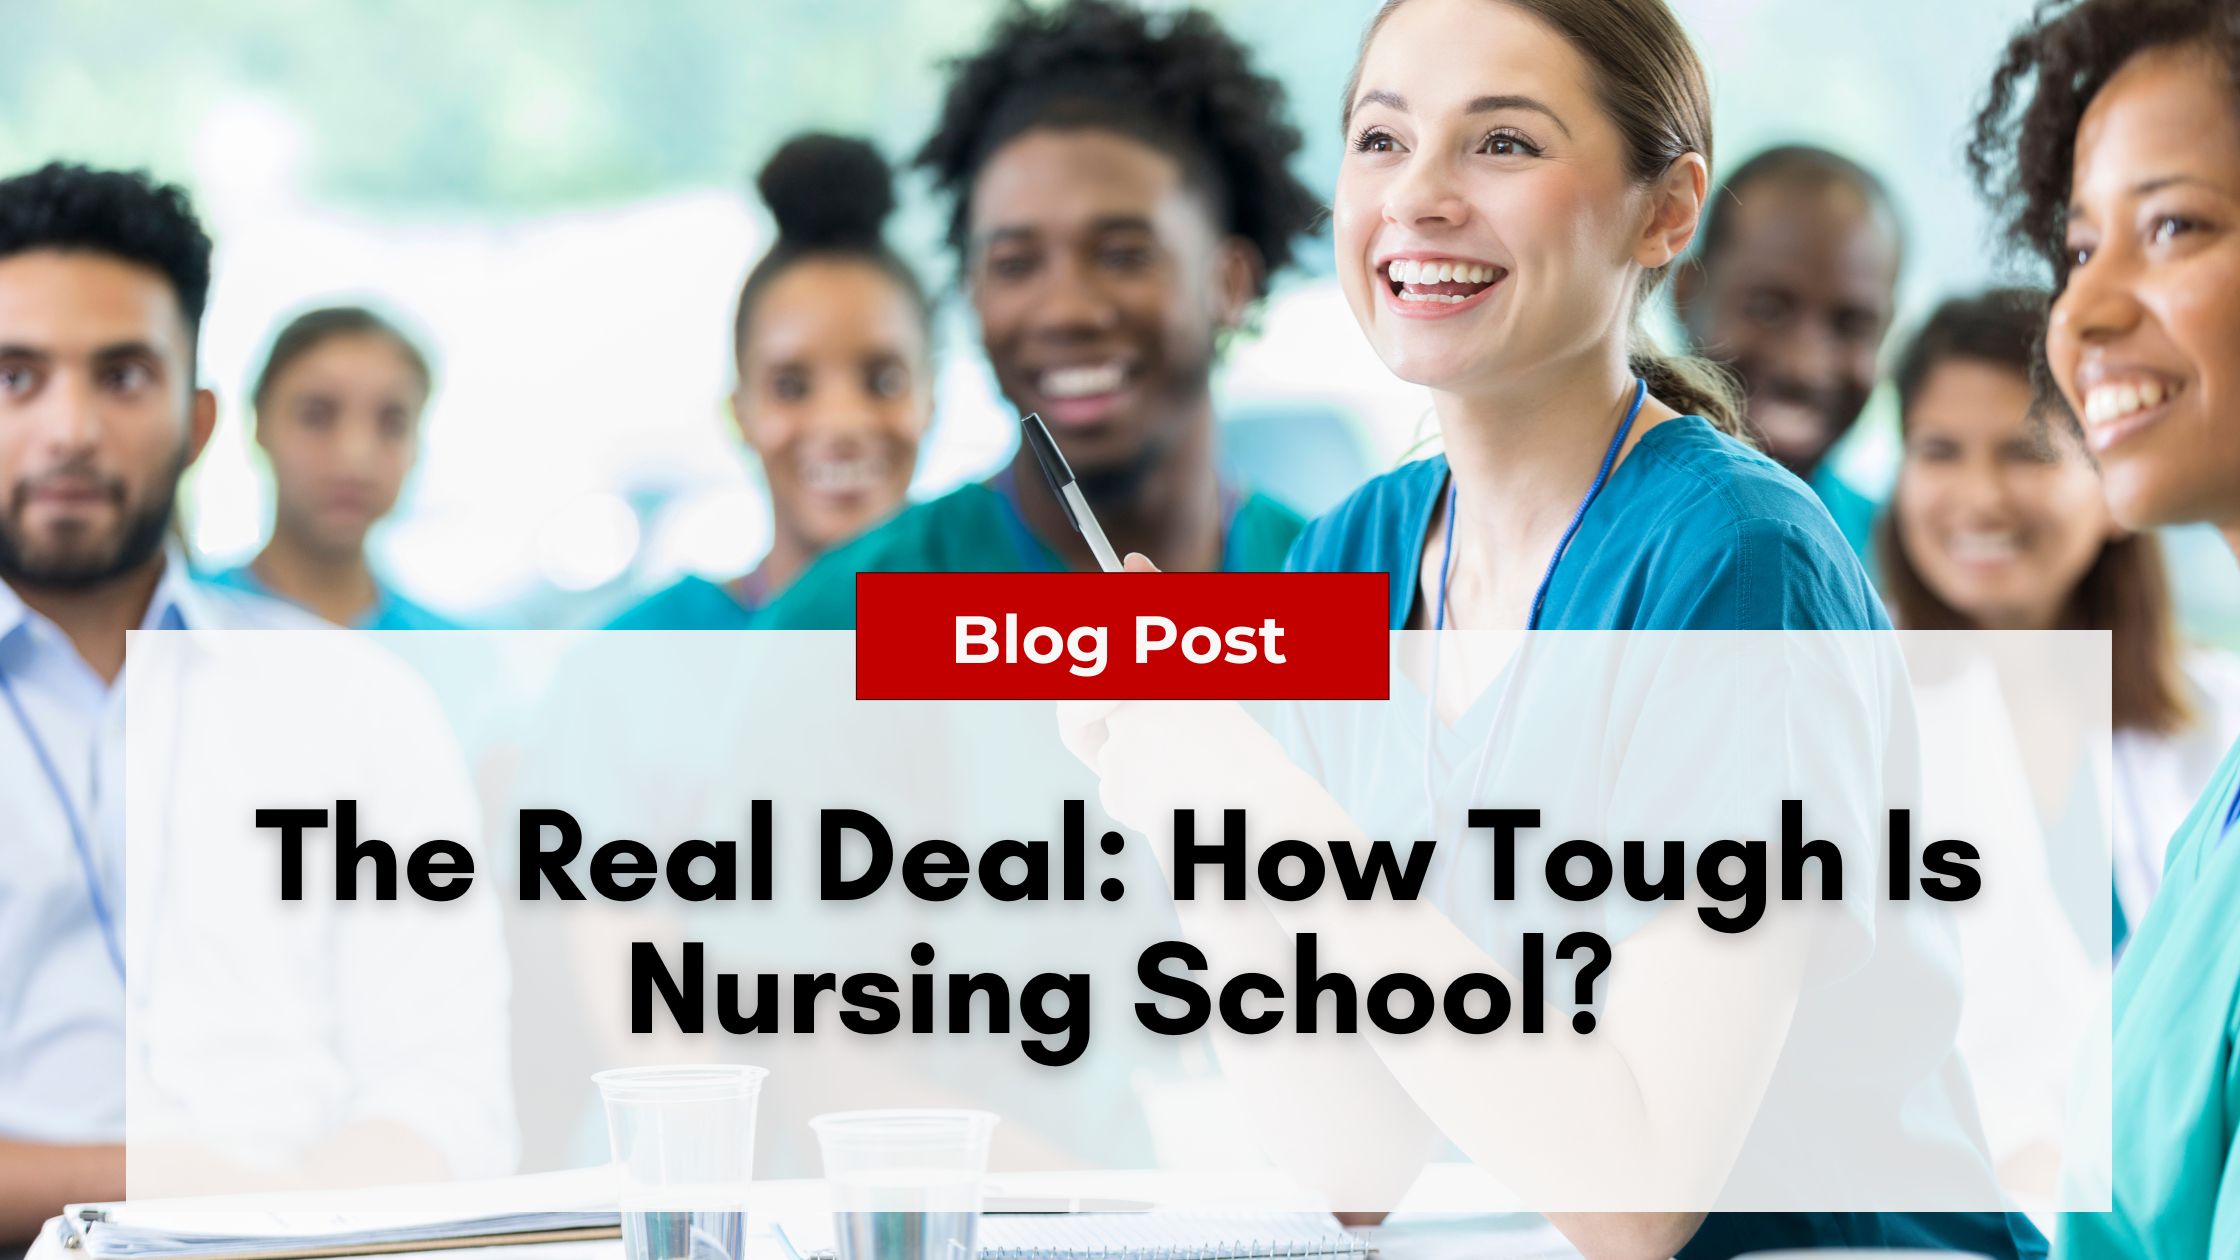 A diverse group of nursing students in scrubs, sitting and smiling, with a text overlay that reads, "Blog Post: The Real Deal: How Tough Is Nursing School? Avoiding Nurse Practitioner Burnout.